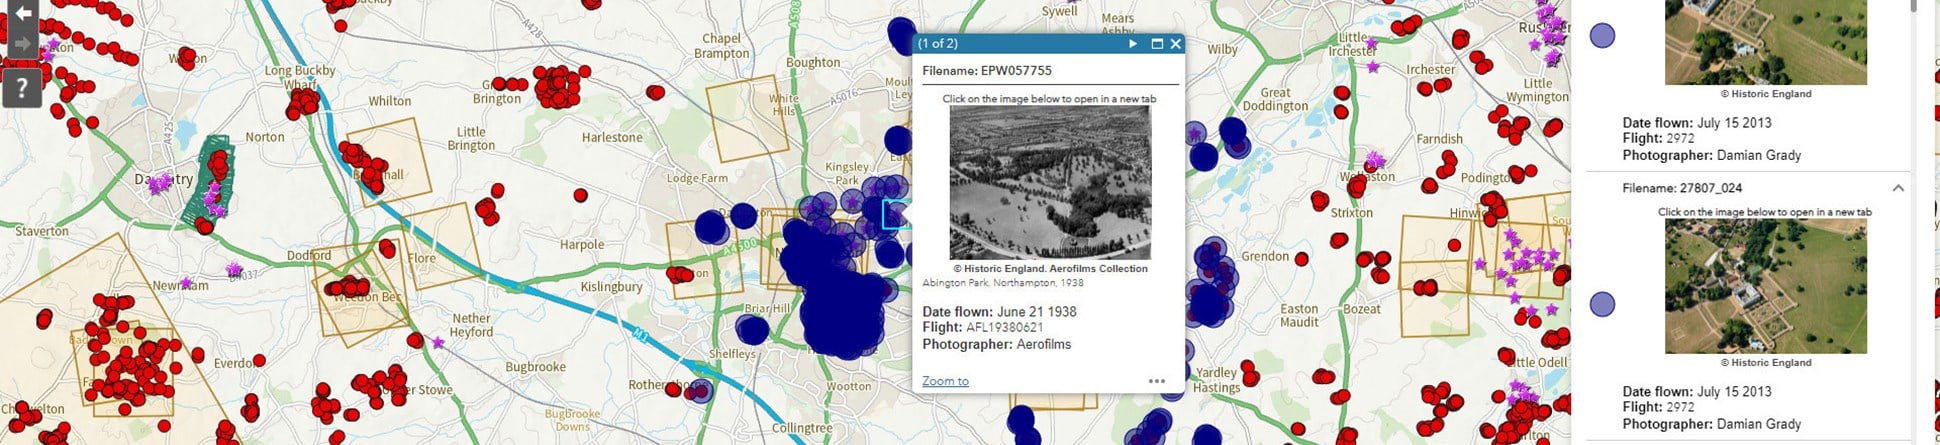 Screen shot of mapping application demonstrating a pop up featuring basic details of an aerial photograph with a thumbnail of the image.